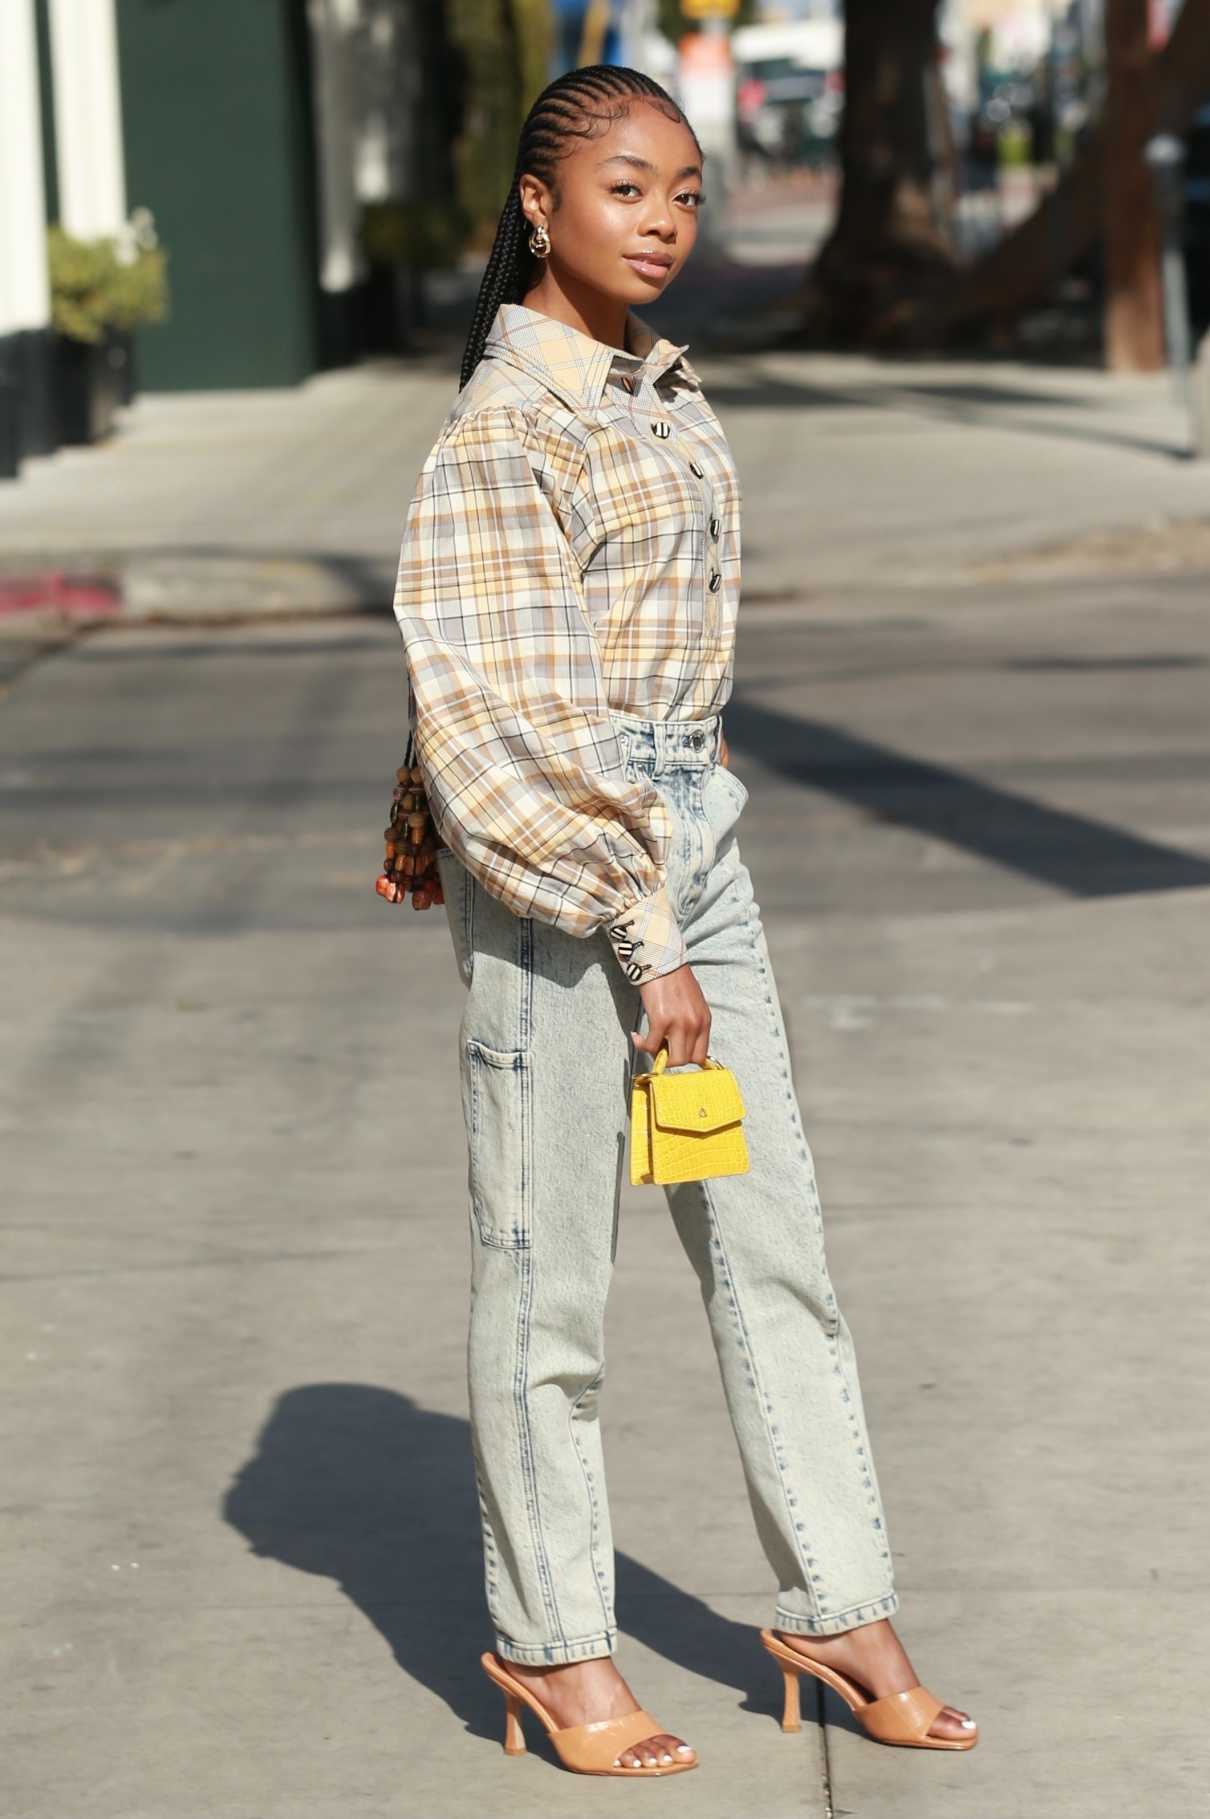 Skai Jackson in a Plaid Blouse Was Seen on Melrose Street in West ...